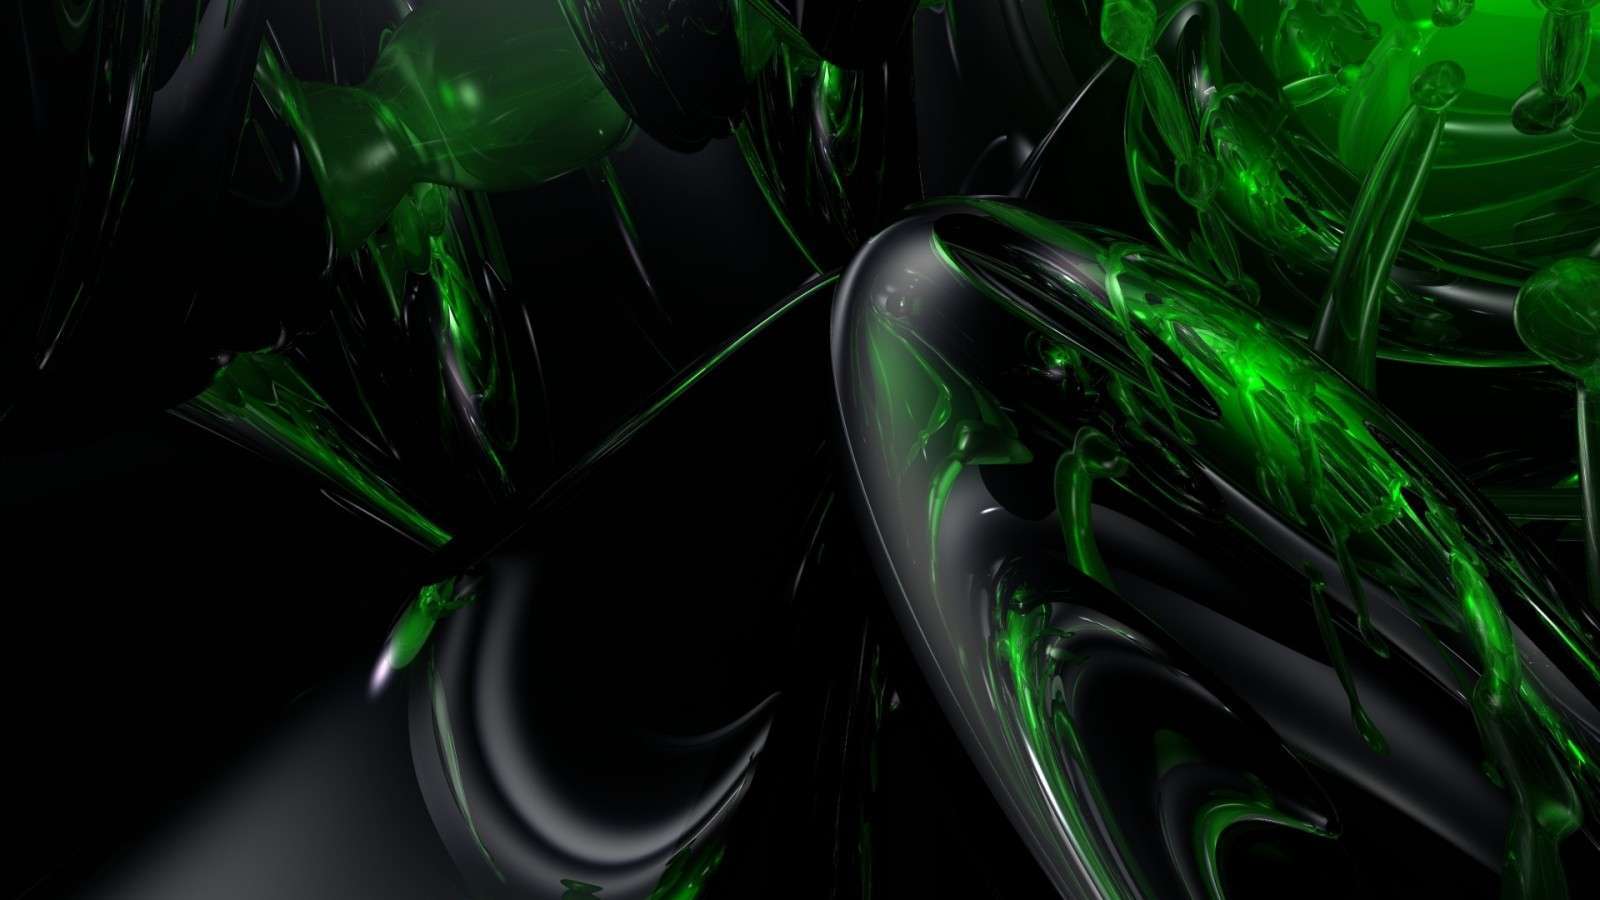 Black and Green Abstract Widescreen Wallpaper 1476 Wallpaper Site